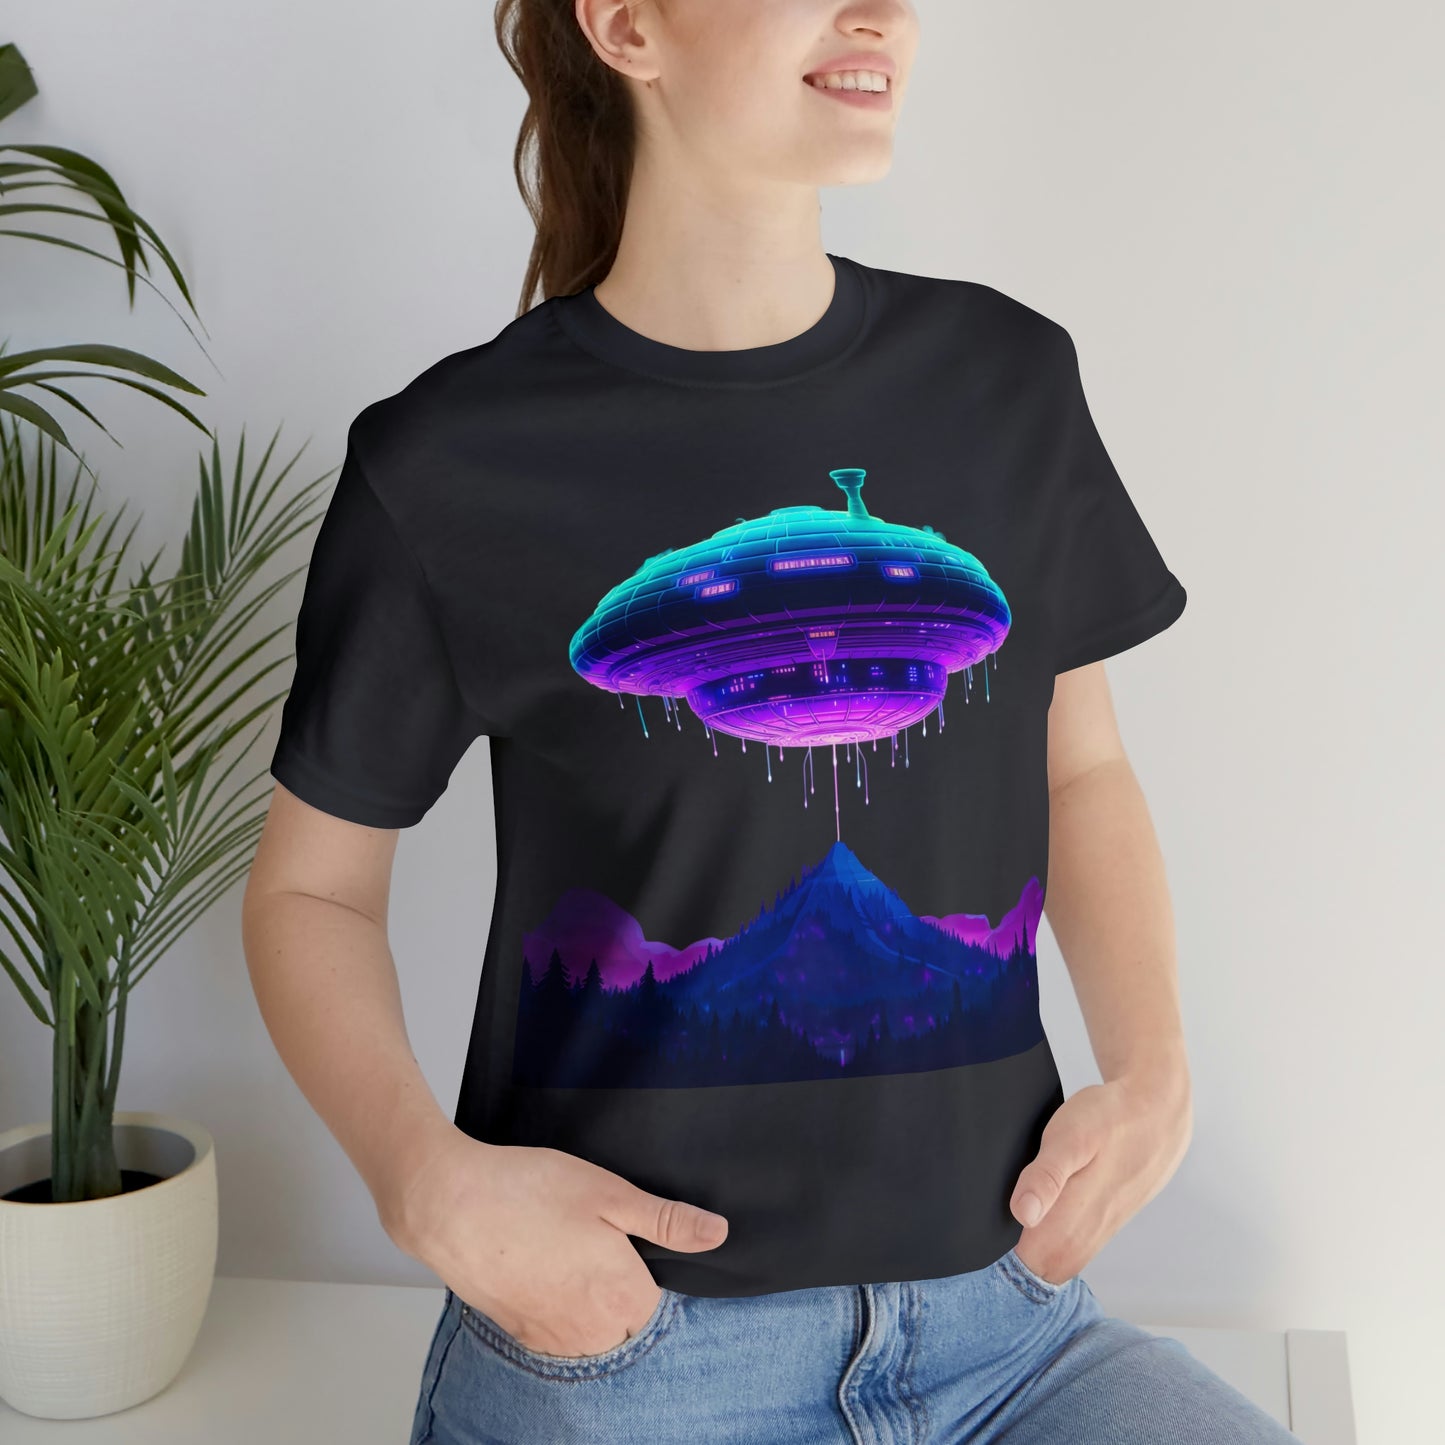 Drippy UFO Retro Style: Embrace Higher Density Living with a Vintage Cosmic Touch